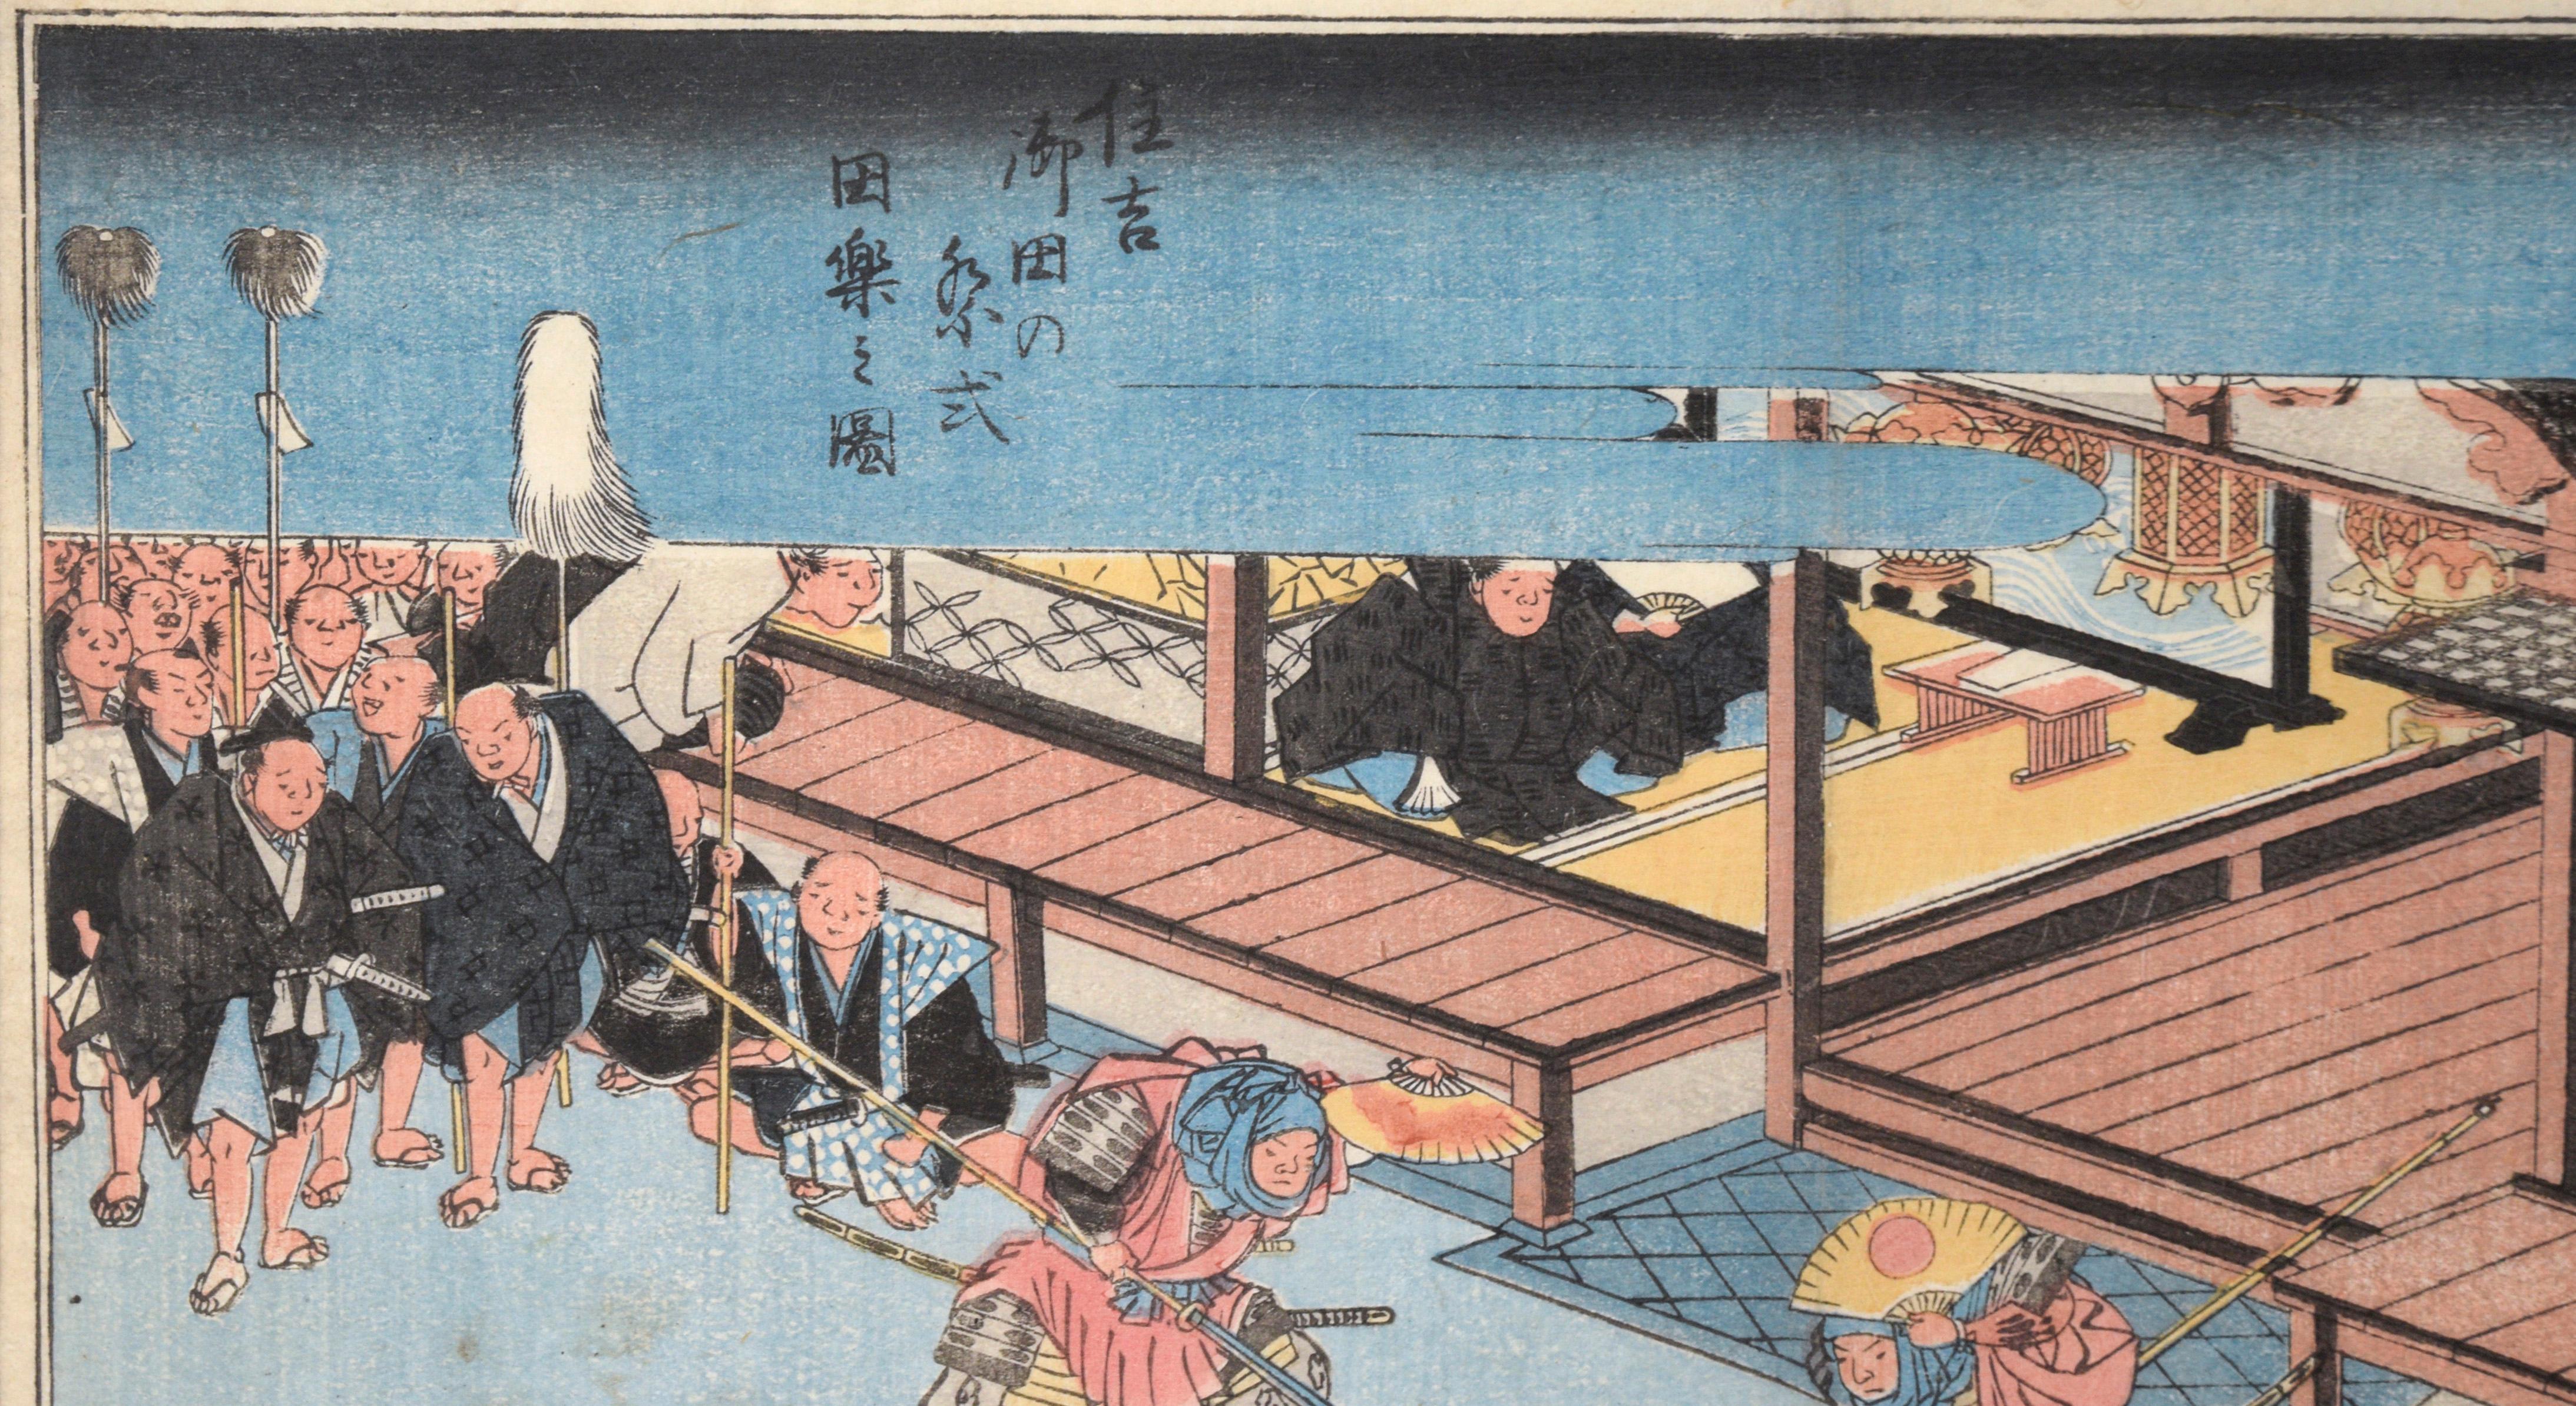 Sumiyoshi: Dengaku dance performed during an Onda ceremony - Woodblock Print

Bright woodblock print by Utagawa Hiroshige (Japanese, 1797-1858). In this scene, two dancers with swords and fans are facing each other, in the center of a courtyard.